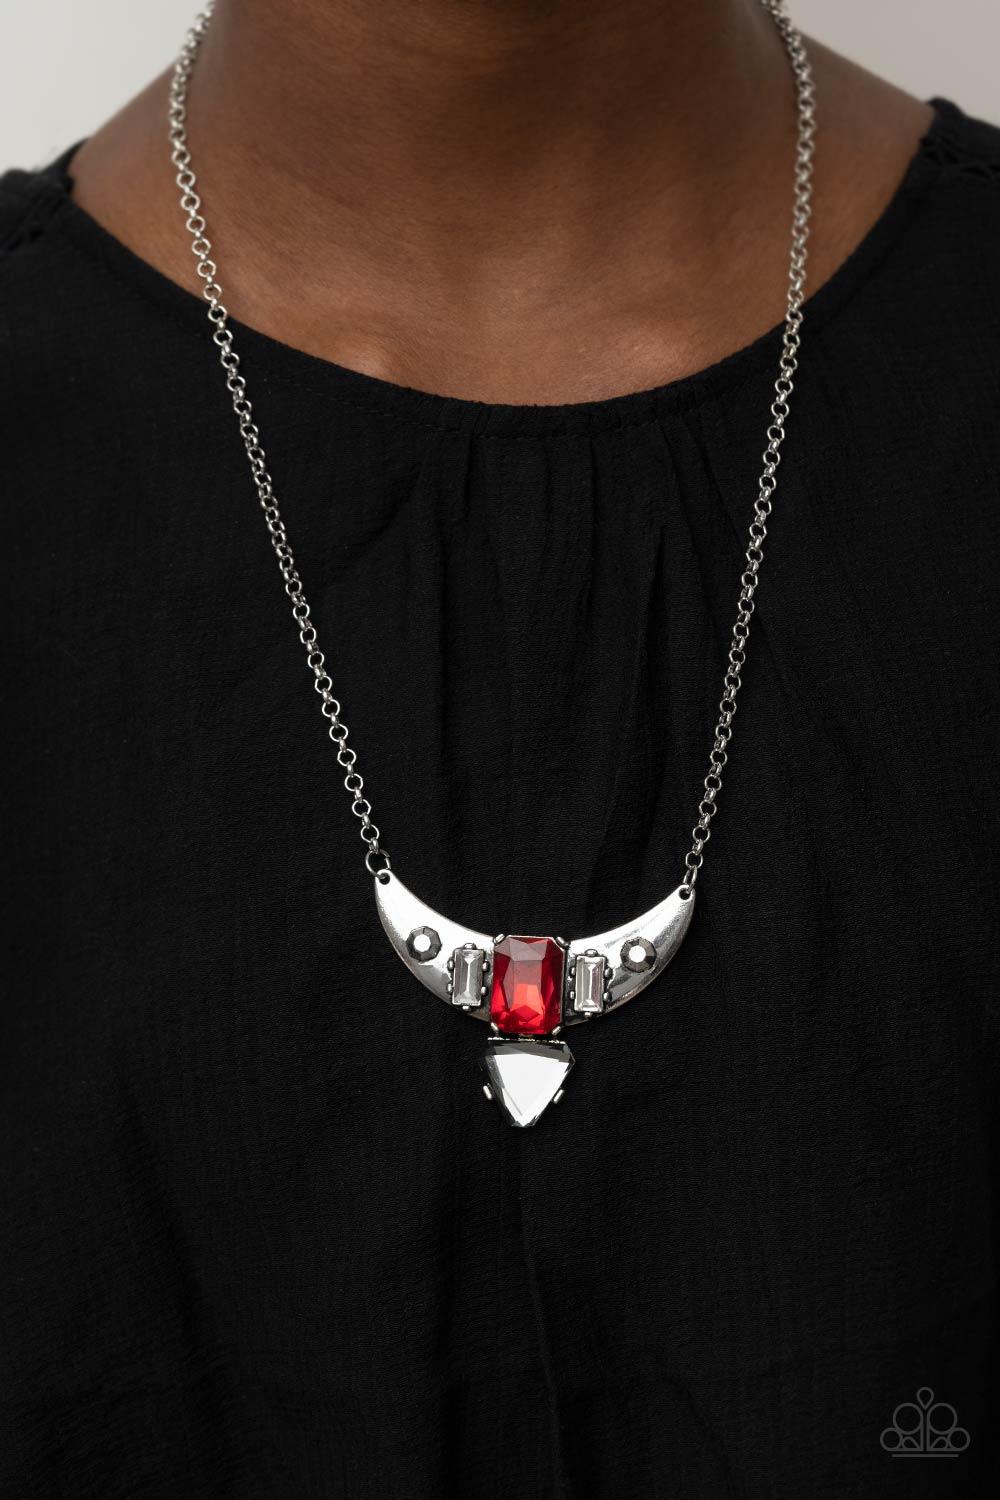 You the TALISMAN! Red Necklace - Jewelry by Bretta